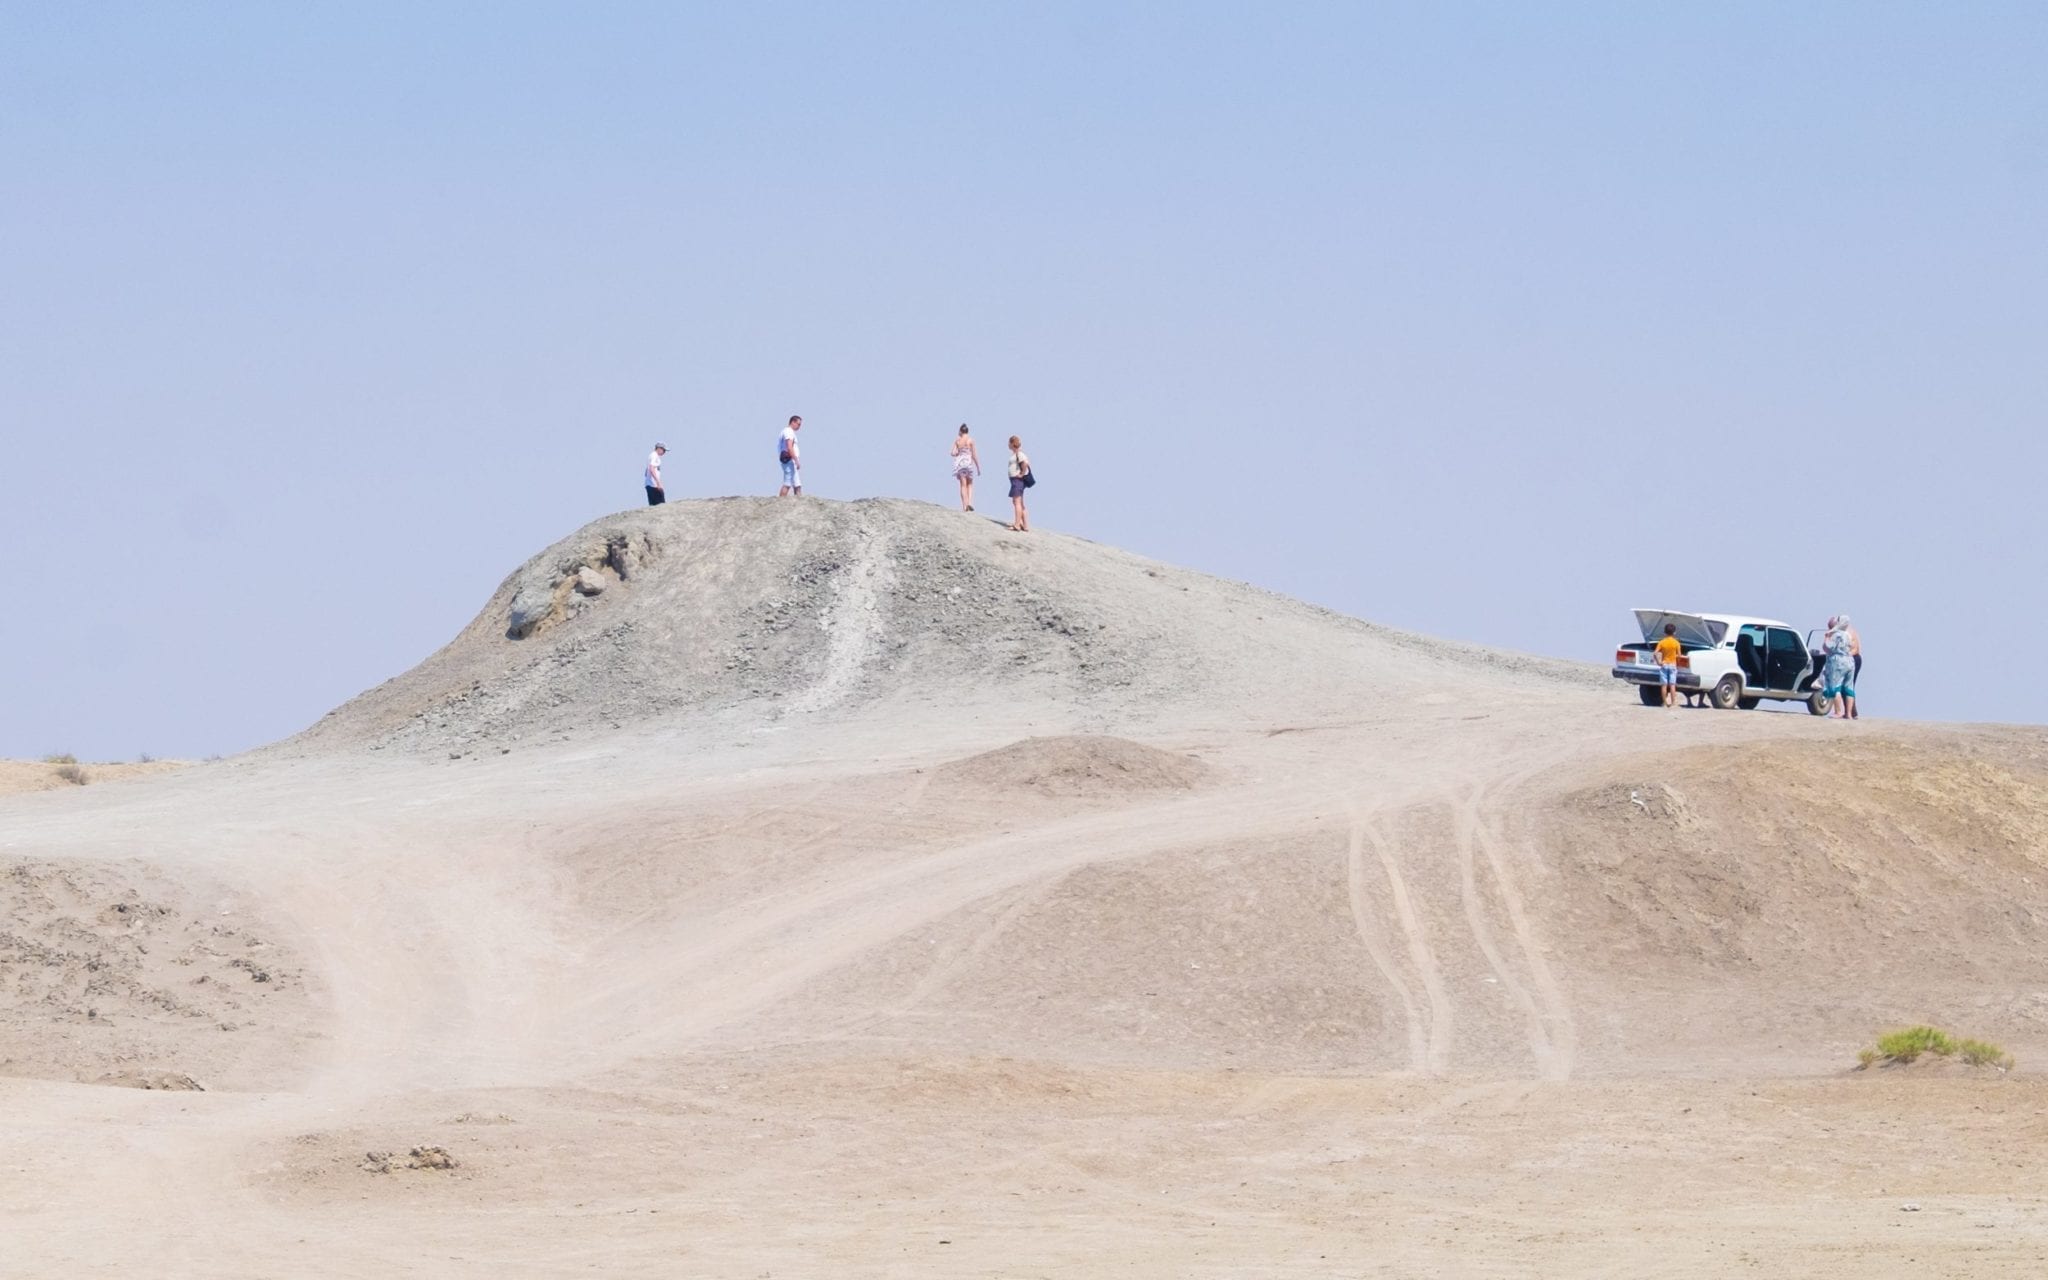 Four tiny people standing atop a mud volcano in the desert, making it look enormous.